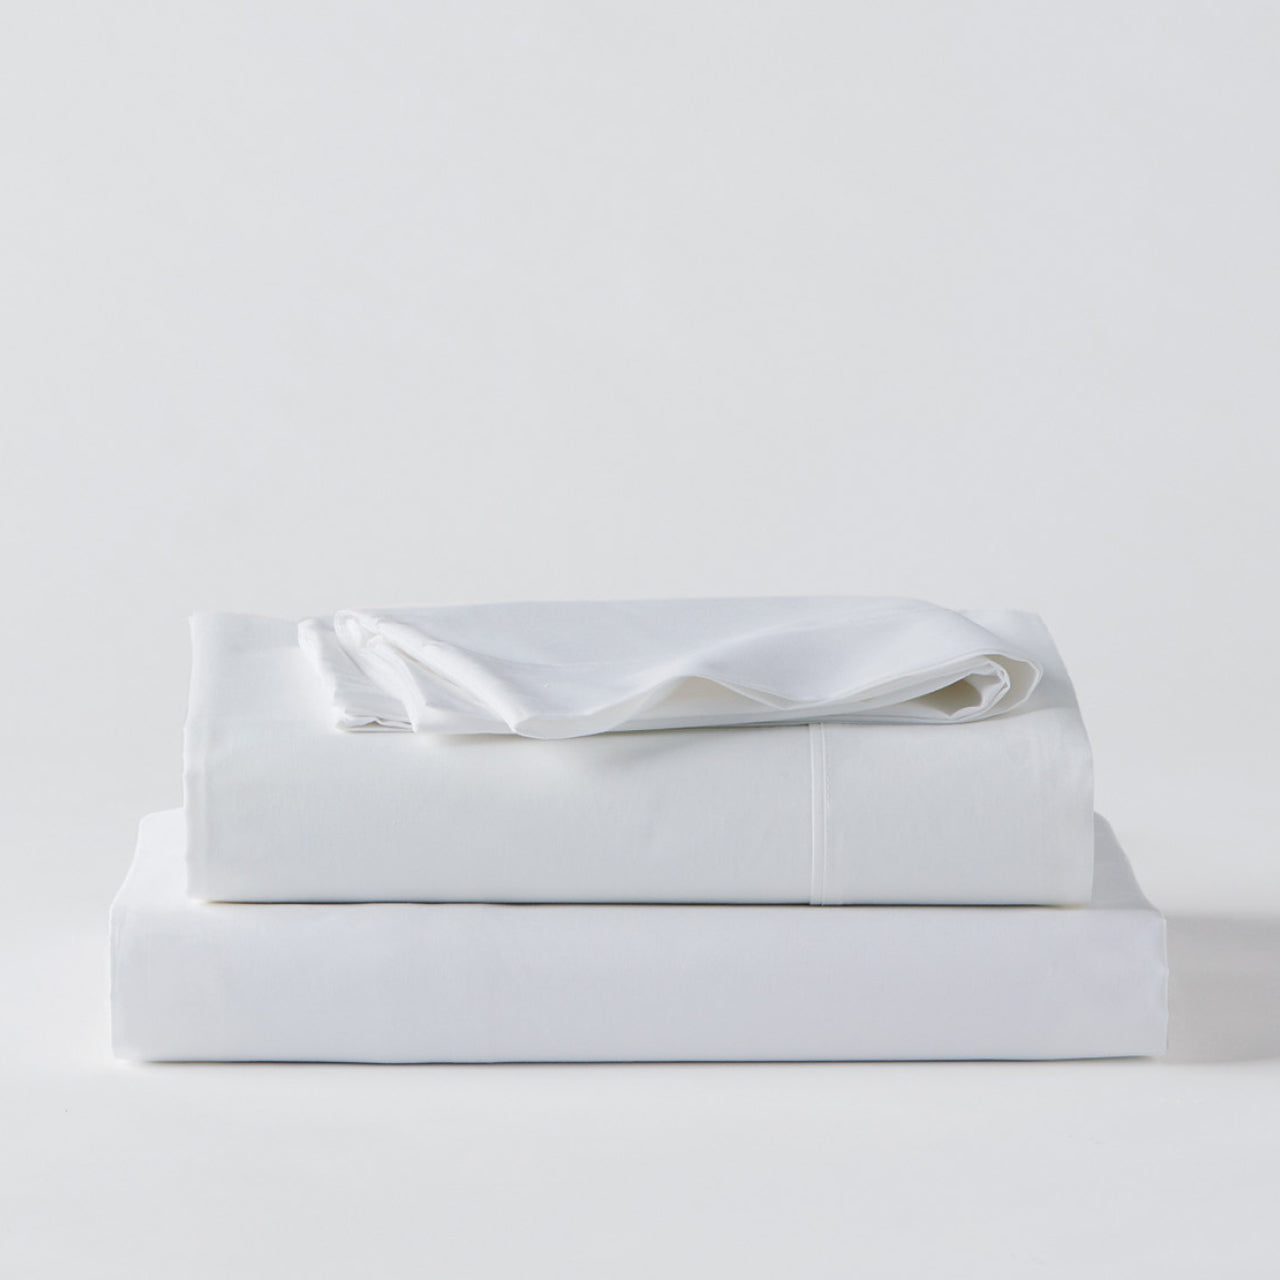 Premium Percale White Sheets folded up on floor